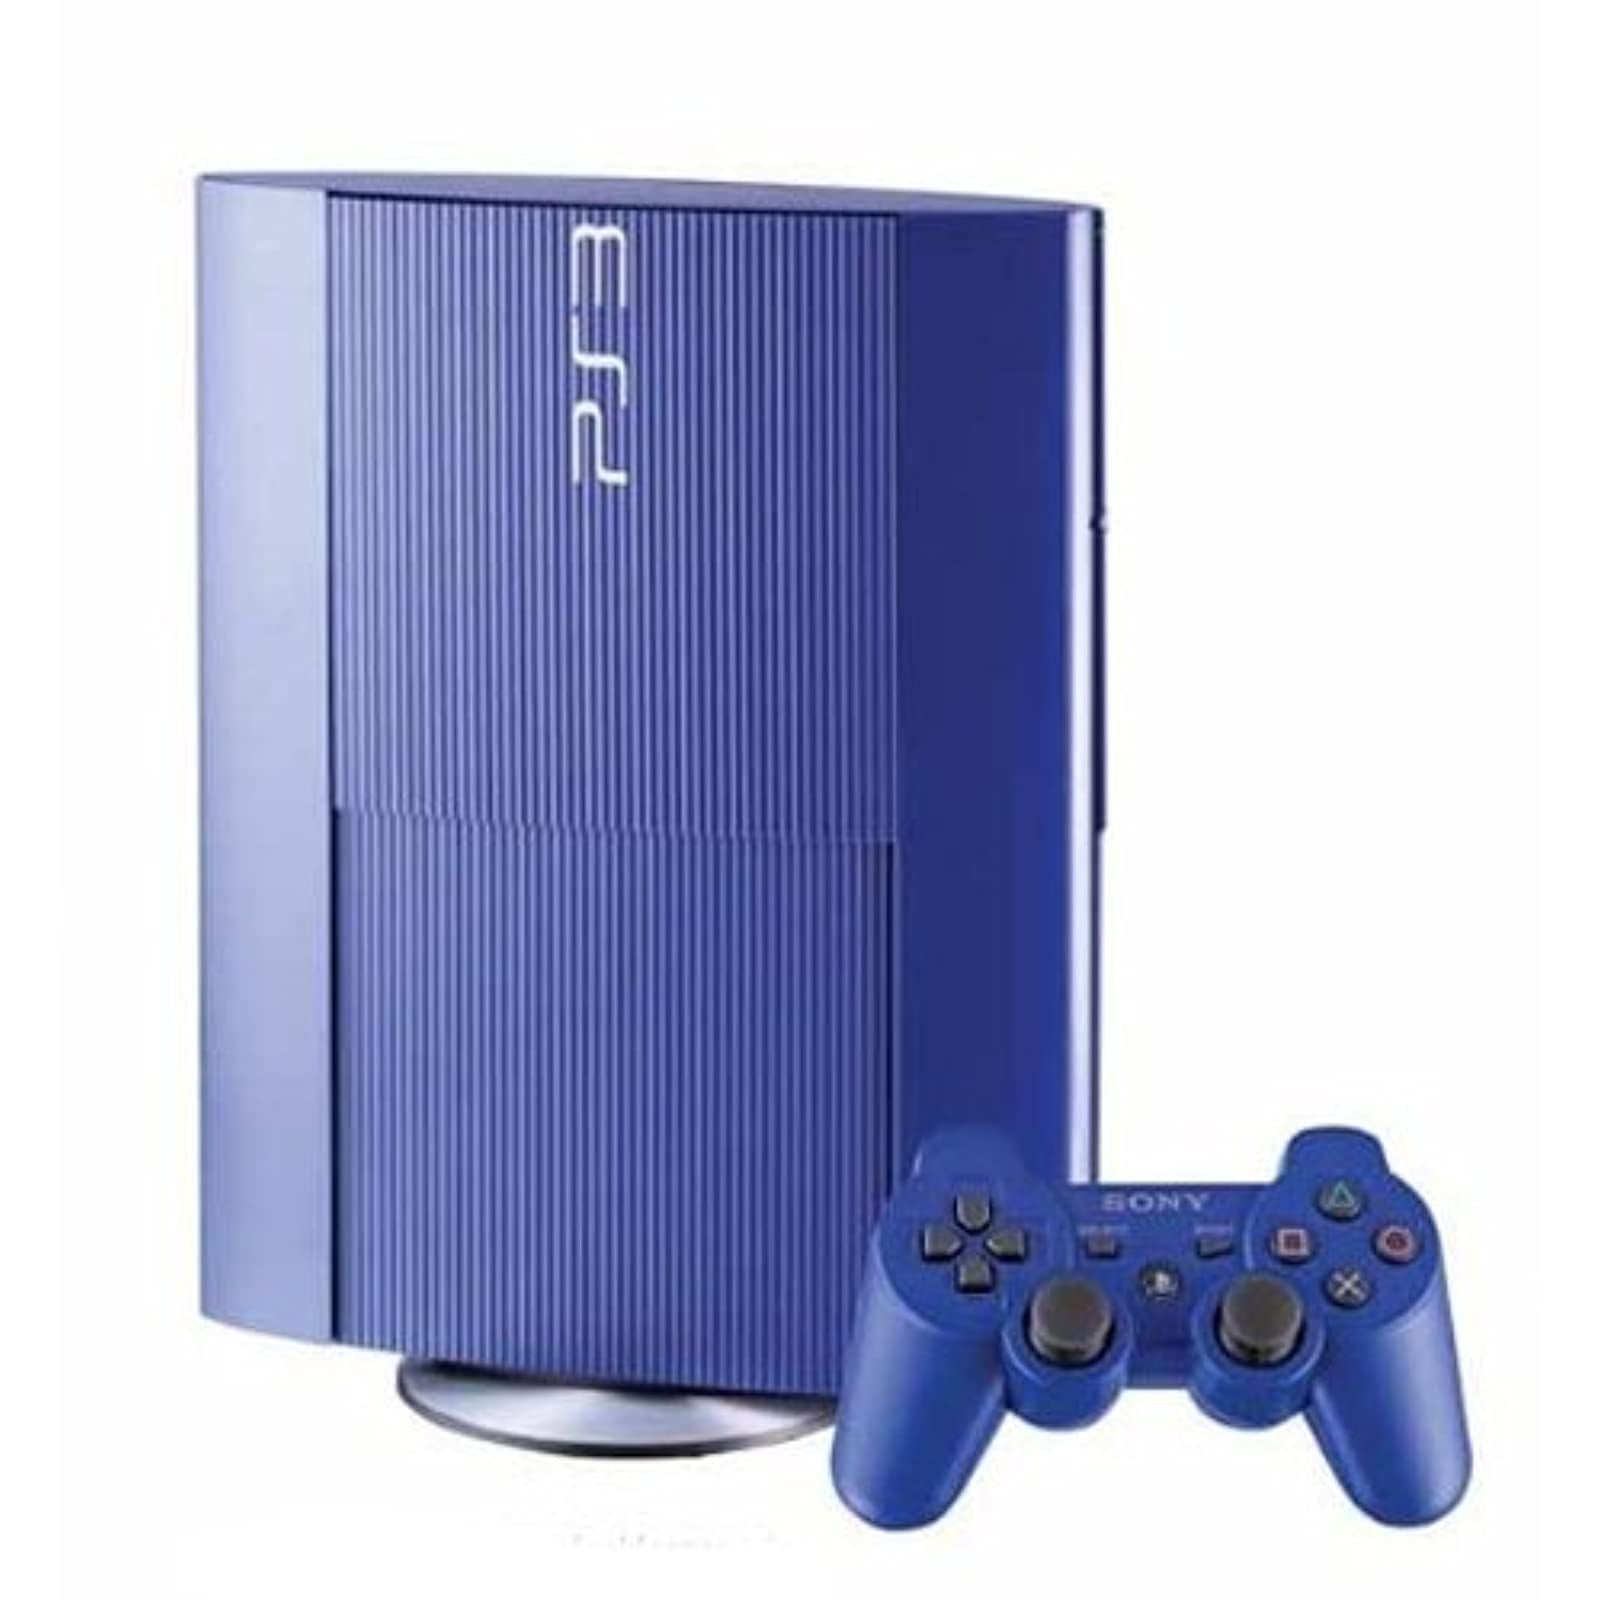 Restored Sony PlayStation 3 PS3 500GB Console Blue Azure (Refurbished)